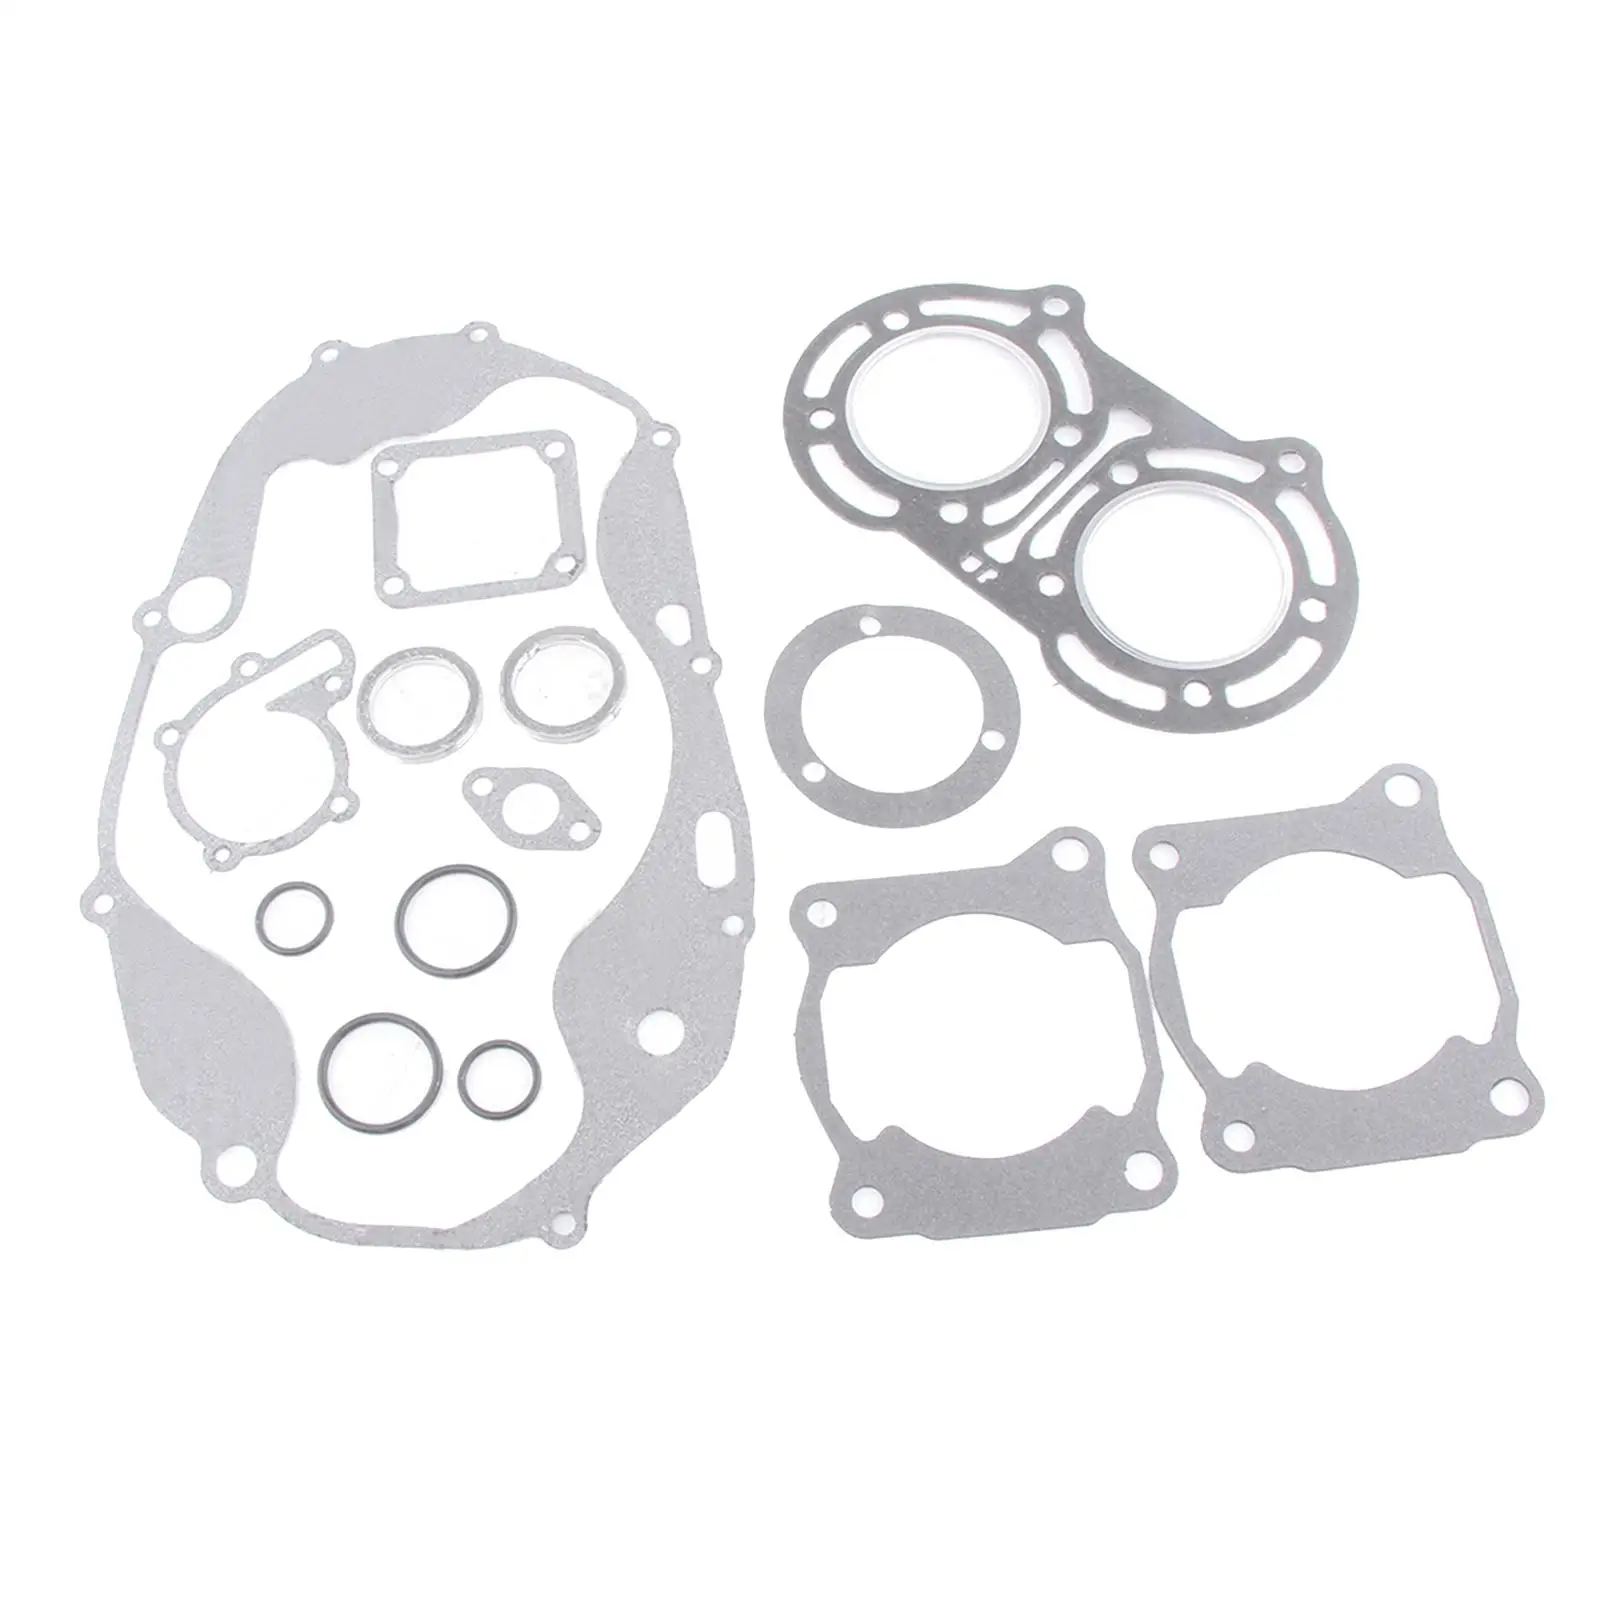 New Silver Replacement Complete Rebuild Engine Gasket Kit, Full Set, for Yamaha ATV YFZ350, Banshee 350 87-06 GS34